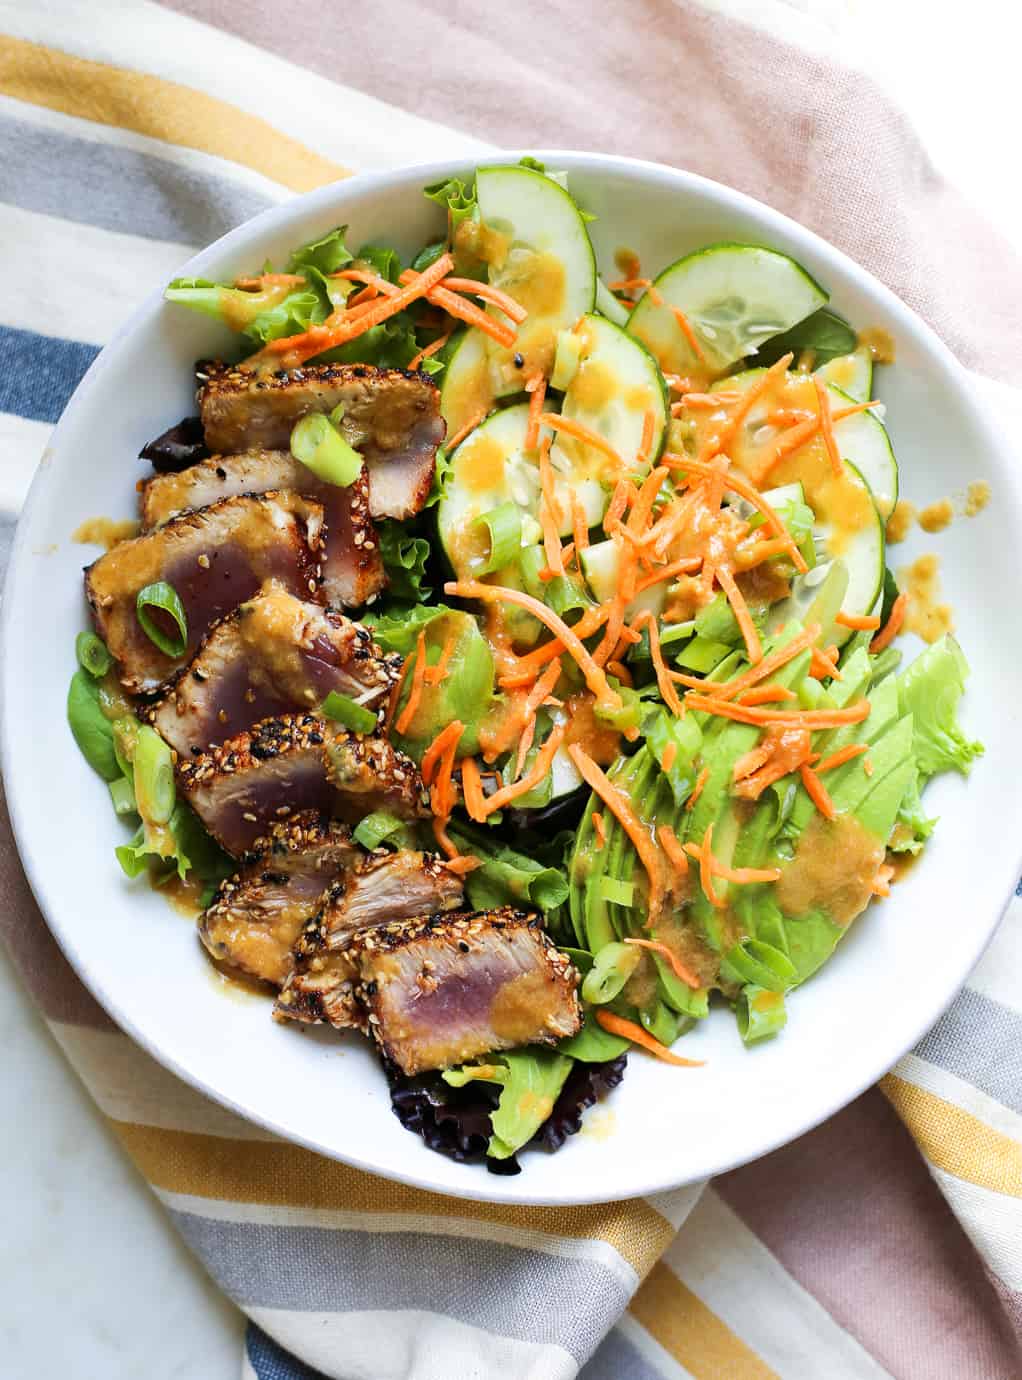 This Seared Tuna Salad with Pineapple-Sesame Dressing is so darn simple yet...